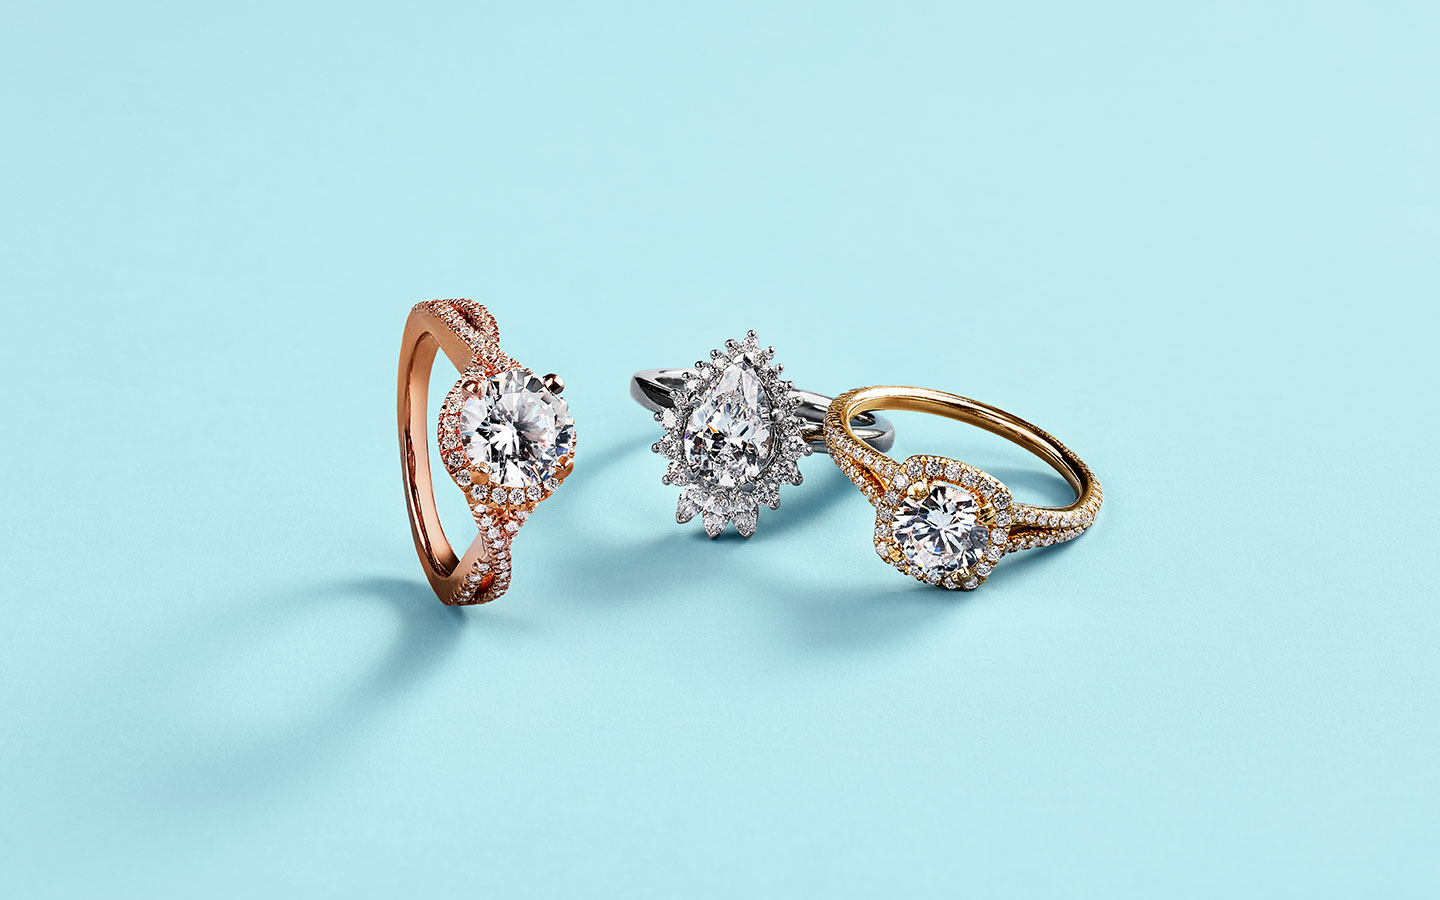 Three diamond and gold engagement rings in white gold, yellow gold and rose gold.